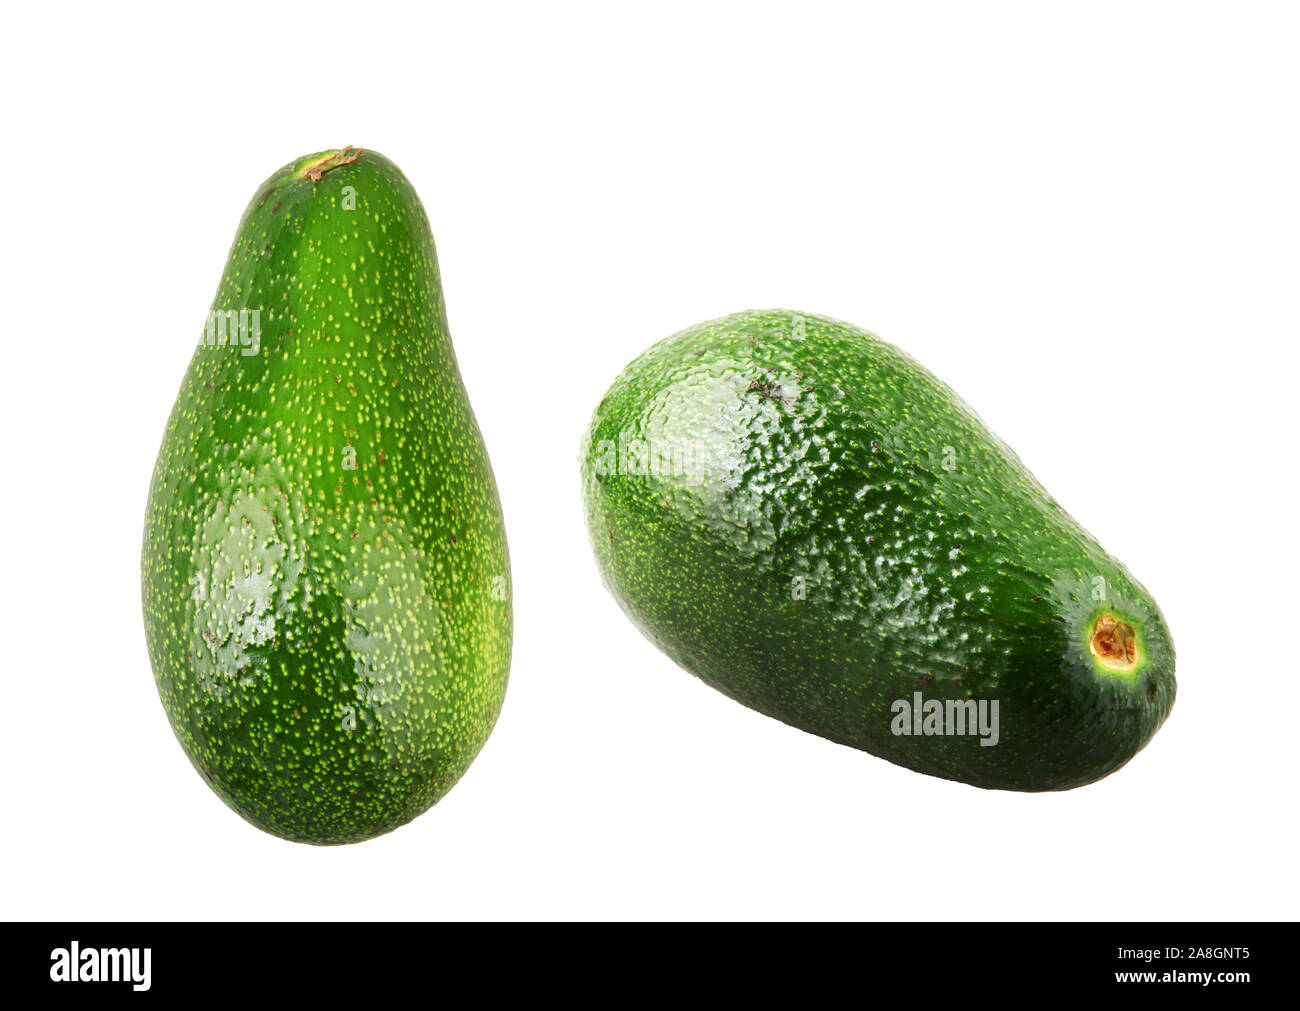 Whole avocado isolated on white background. The avocado or Persea Americana is a fruit that belongs to the family of Lauraceae. Stock Photo